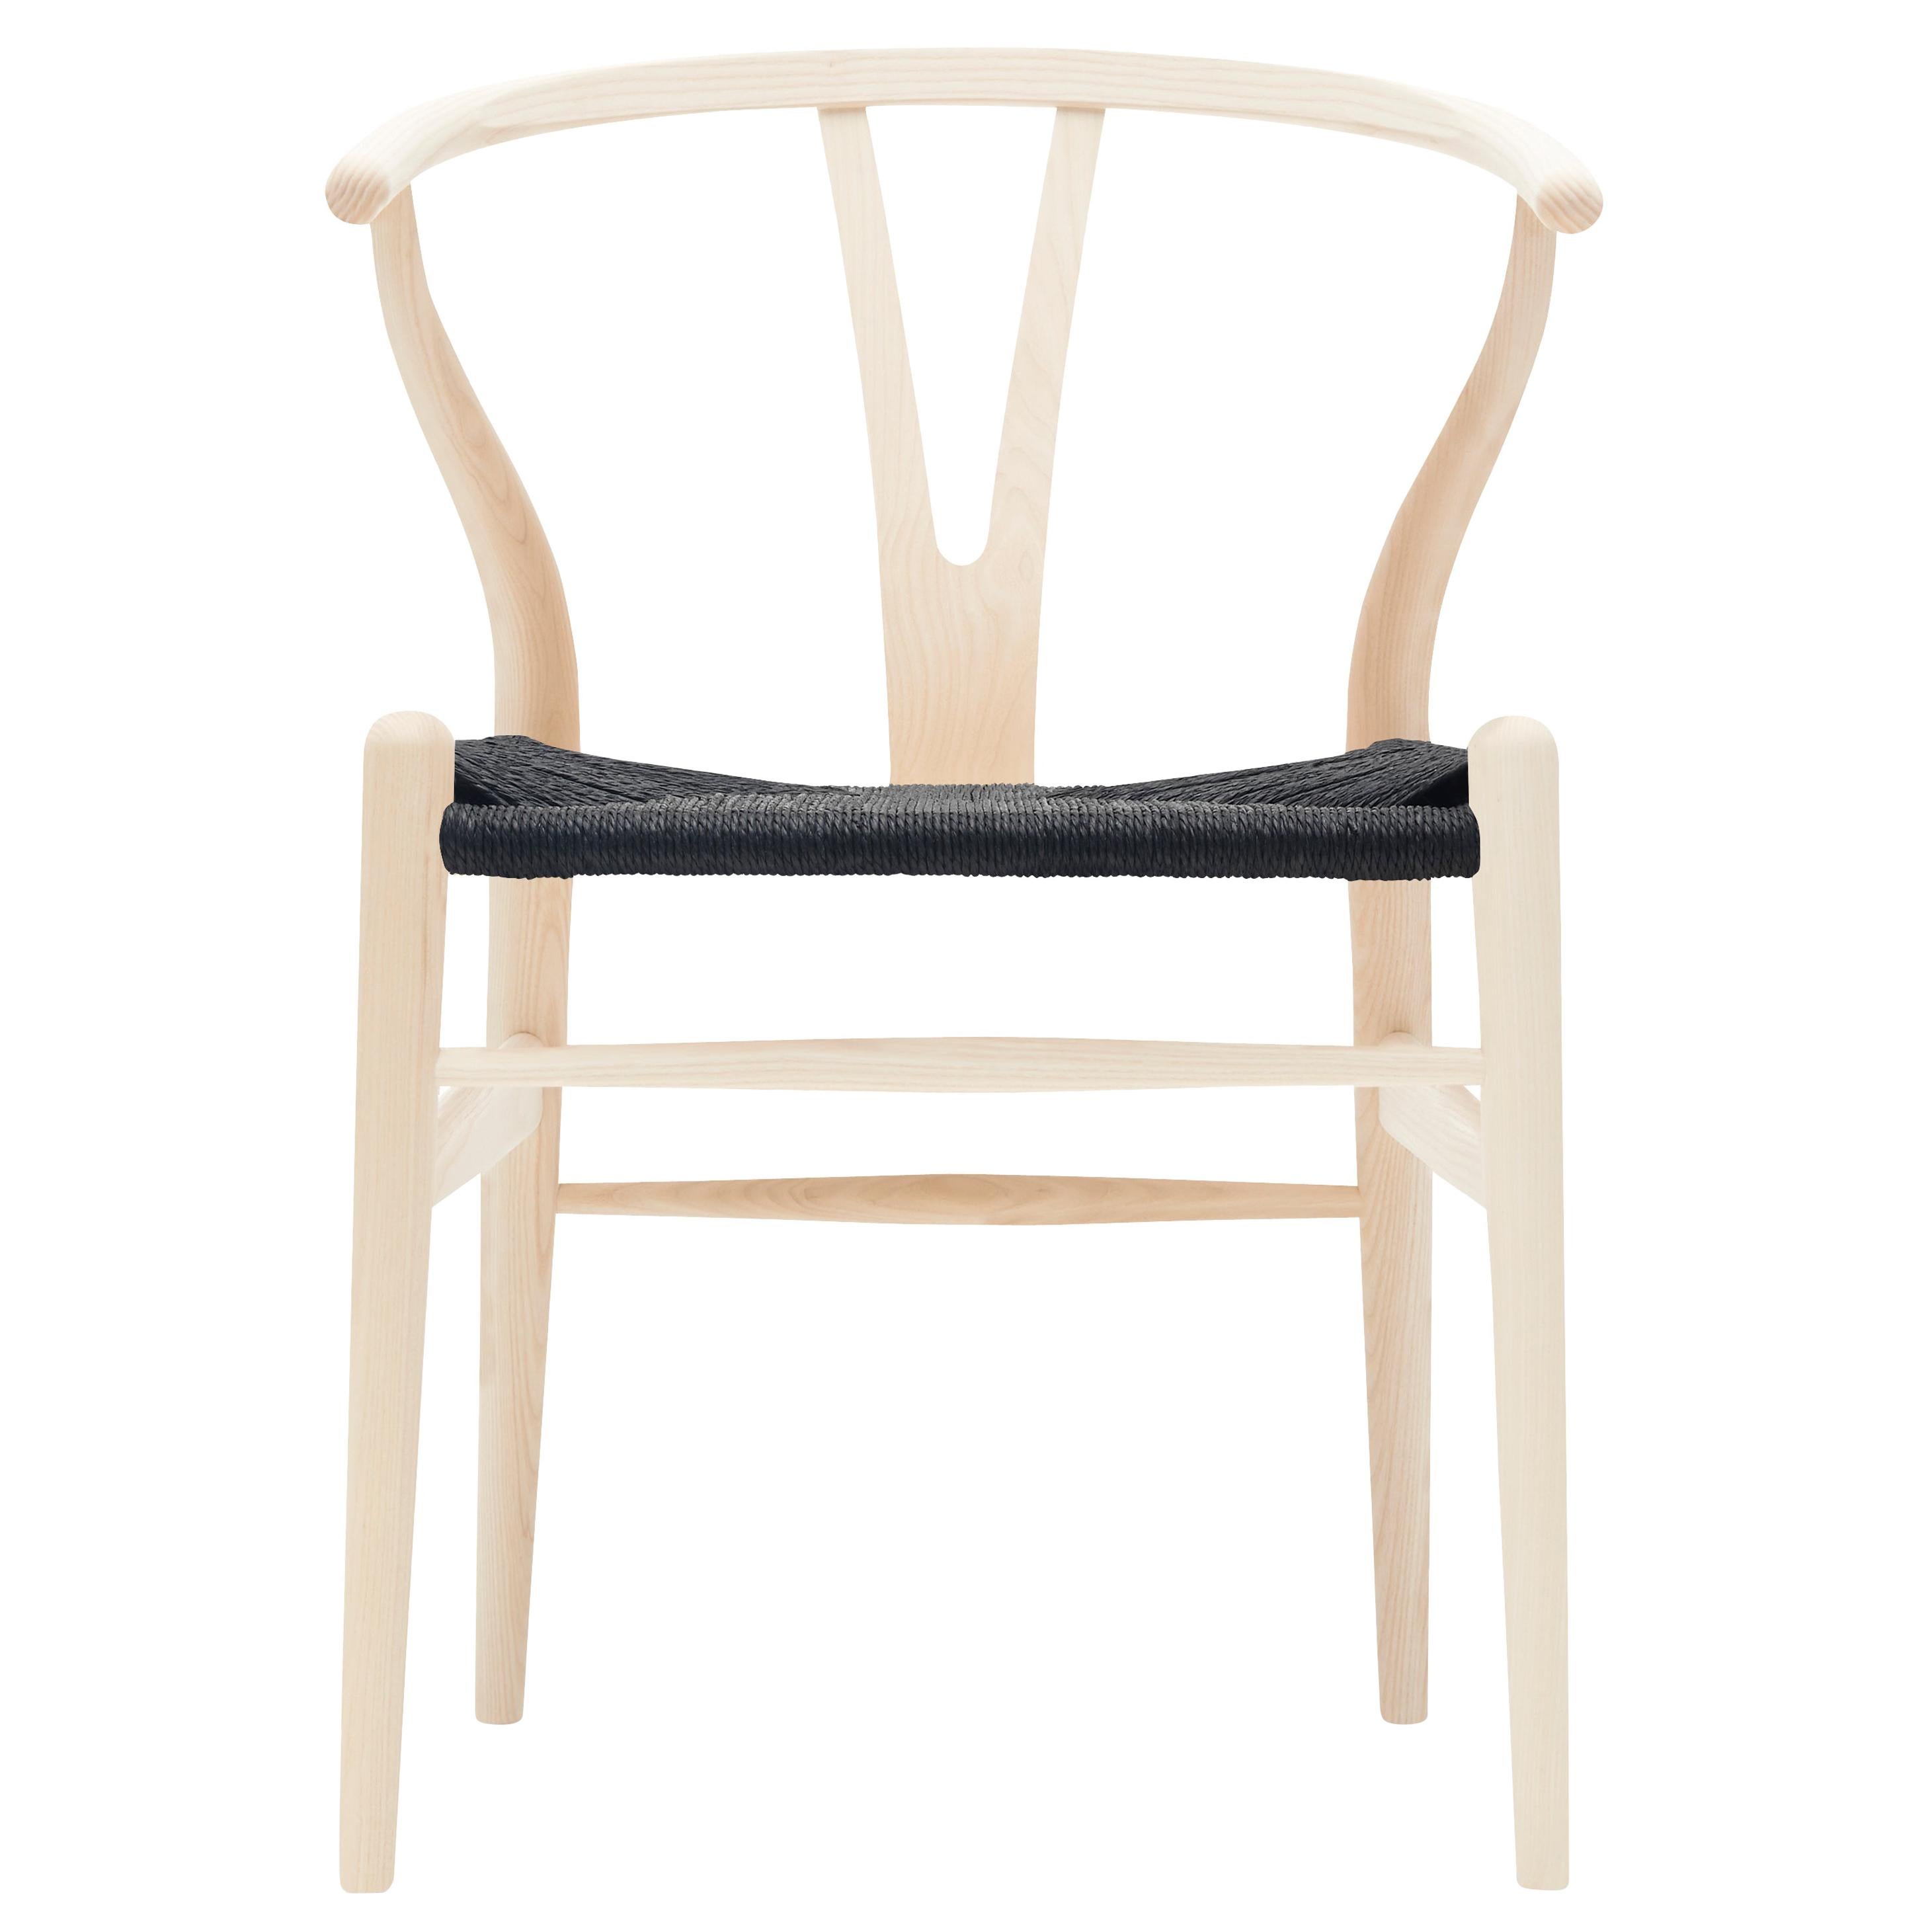 Beige (Ash Soap) CH24 Wishbone Chair in Wood Finishes with Black Papercord Seat by Hans J. Wegner